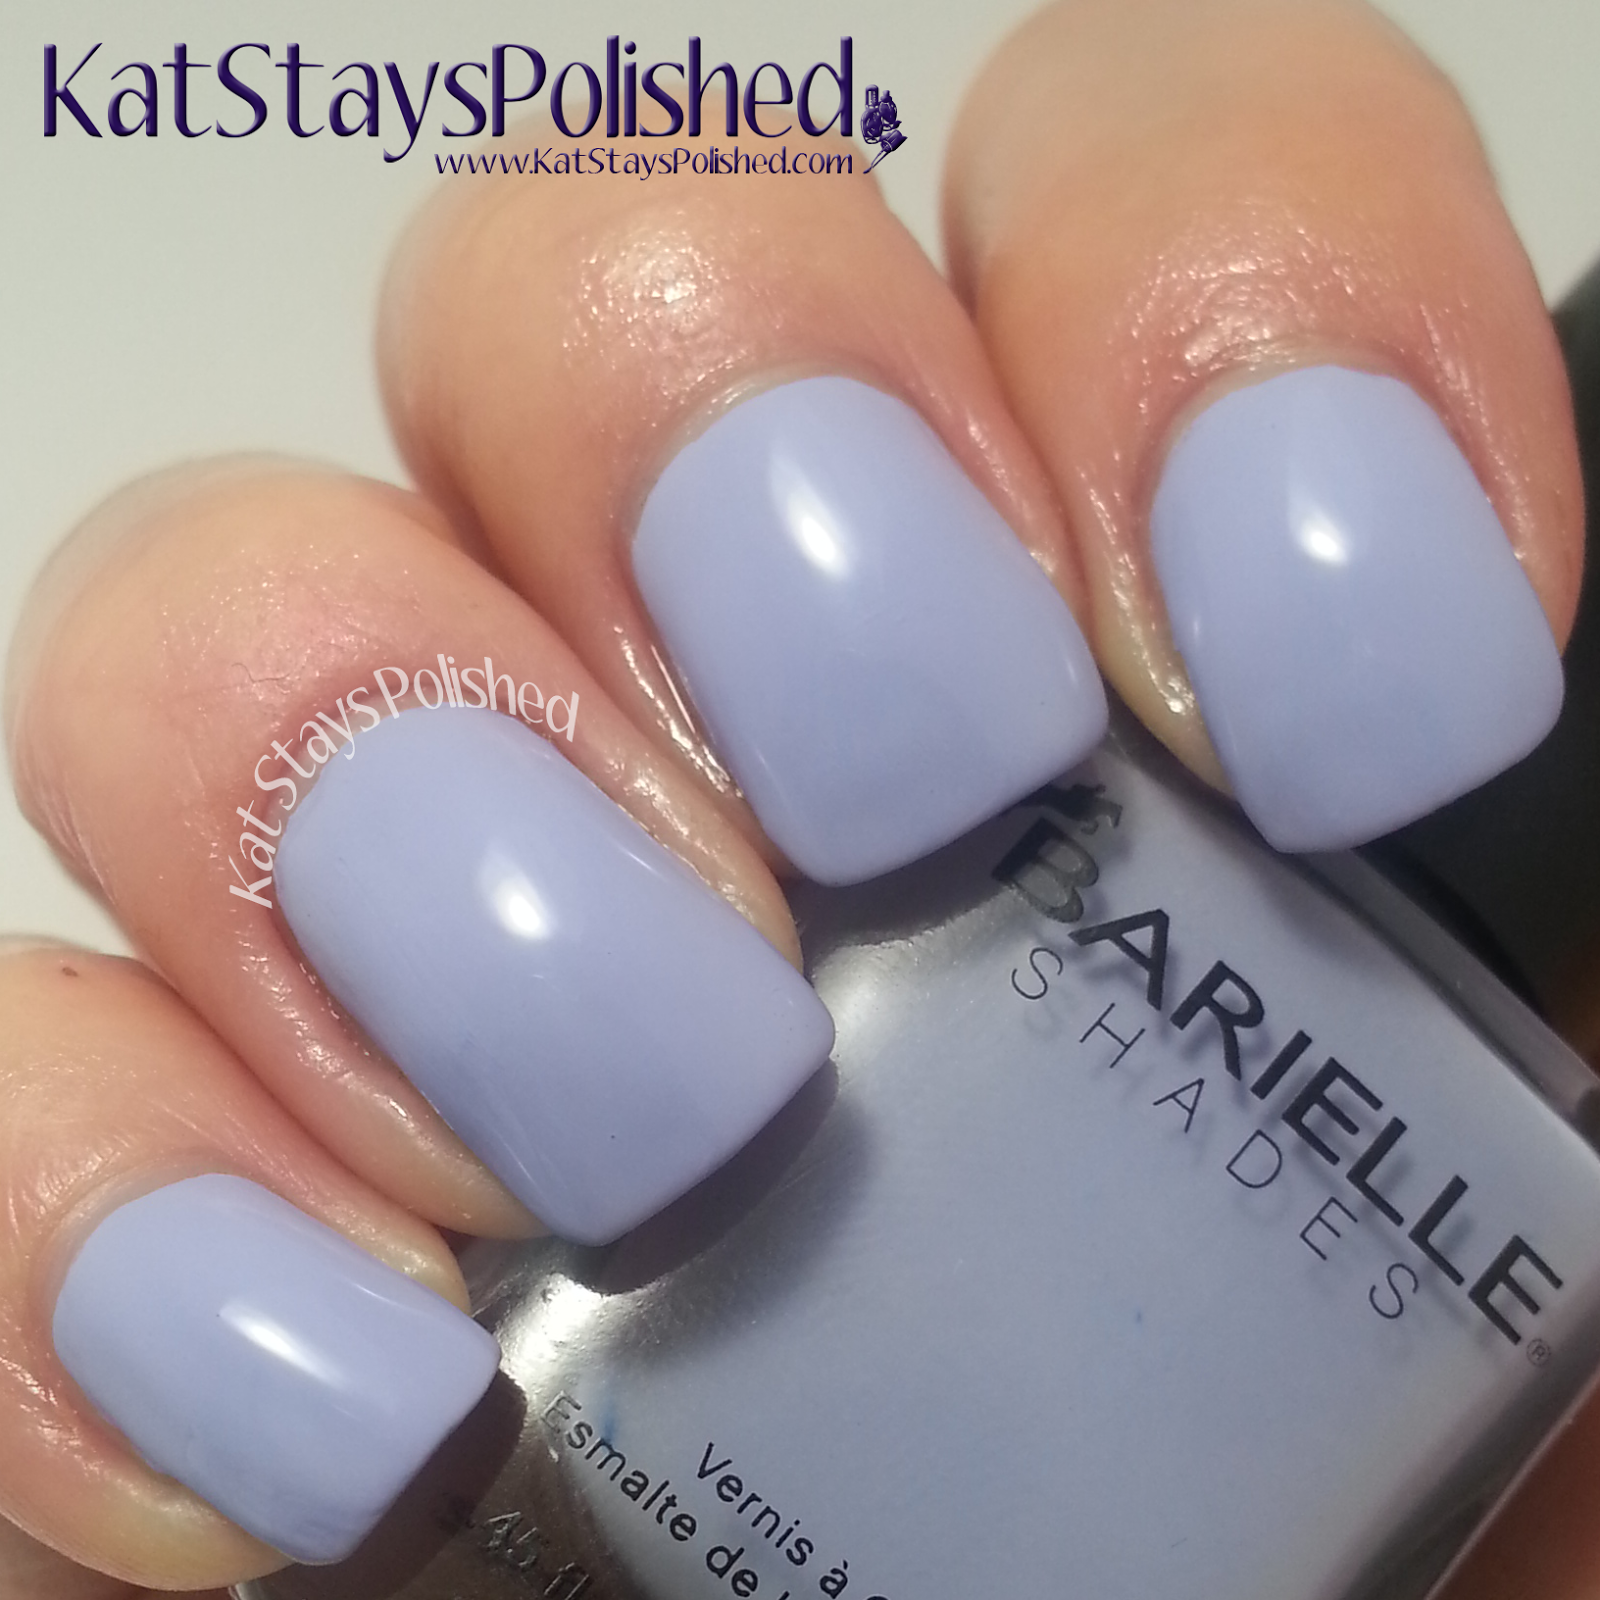 Barielle Jetsetter Collection - Rain in Spain | Kat Stays Polished